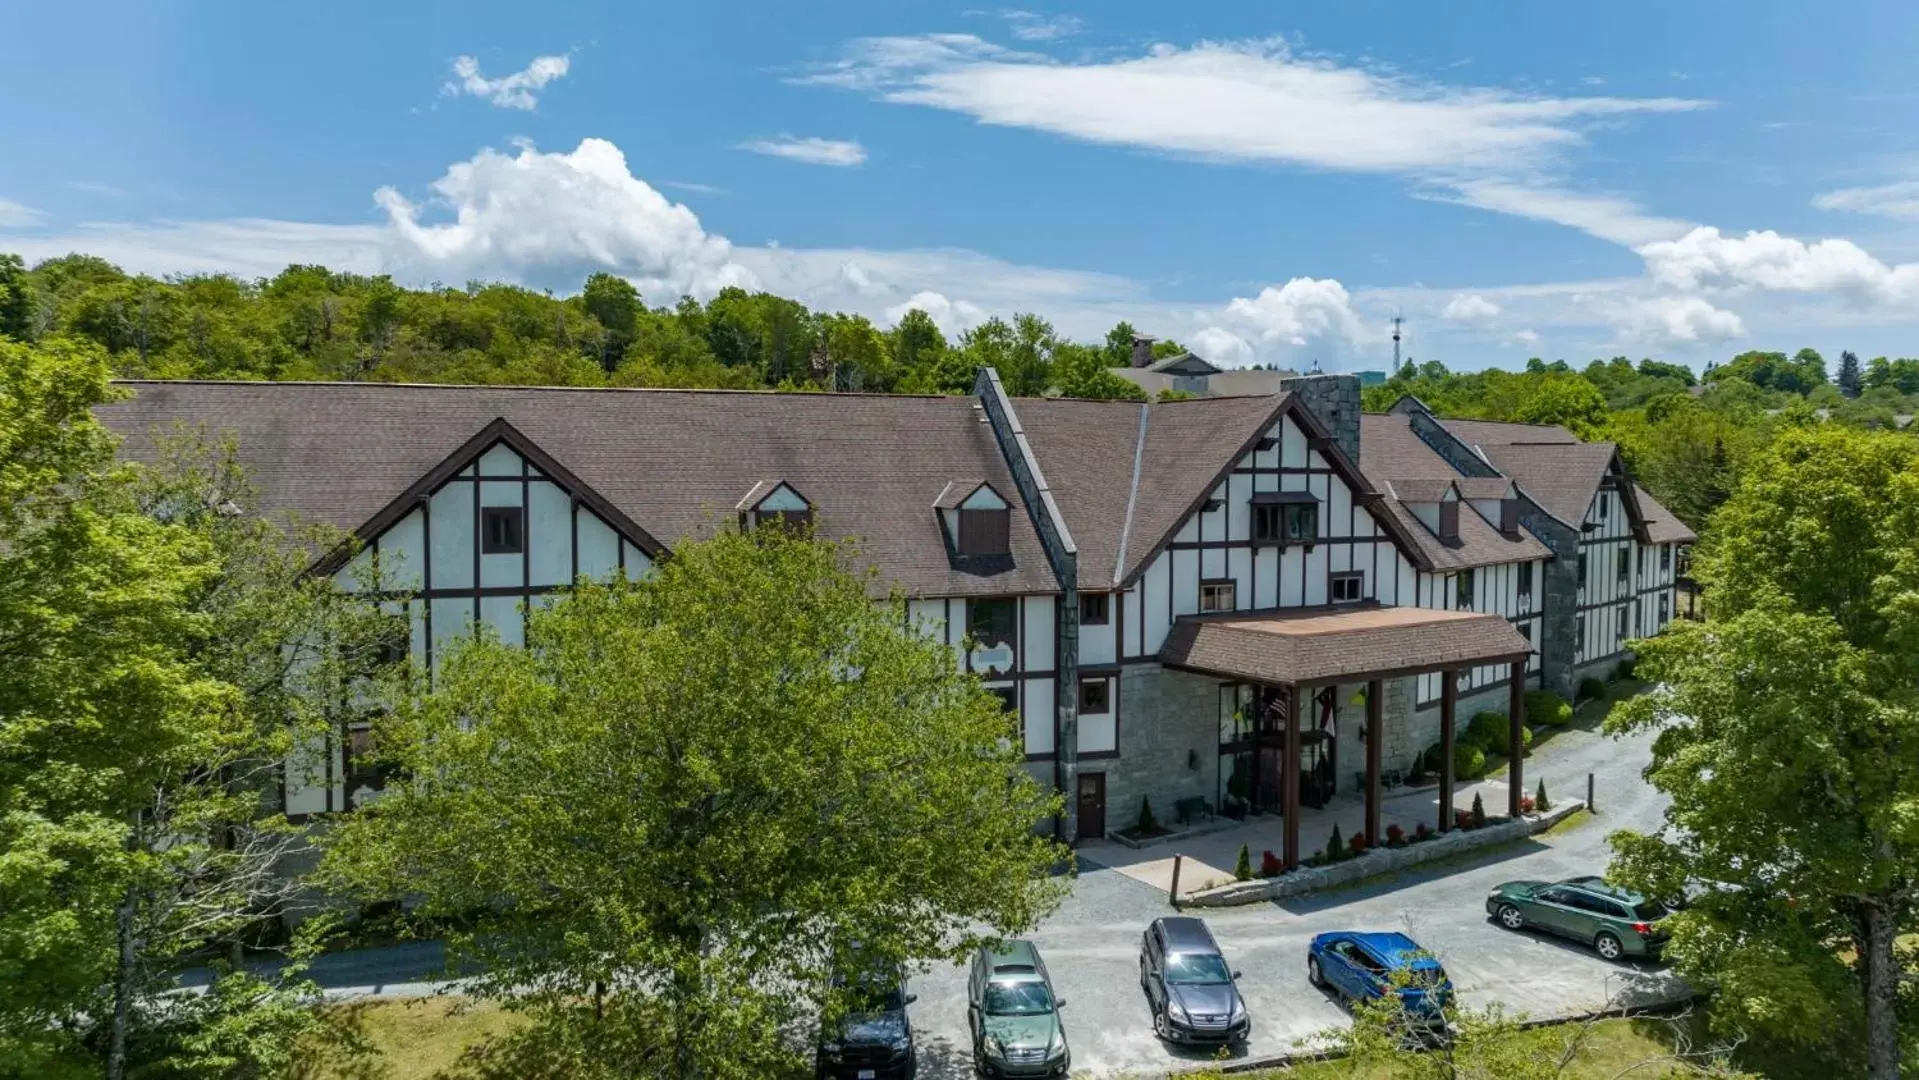 Property Building in 4 Seasons at Beech Mountain